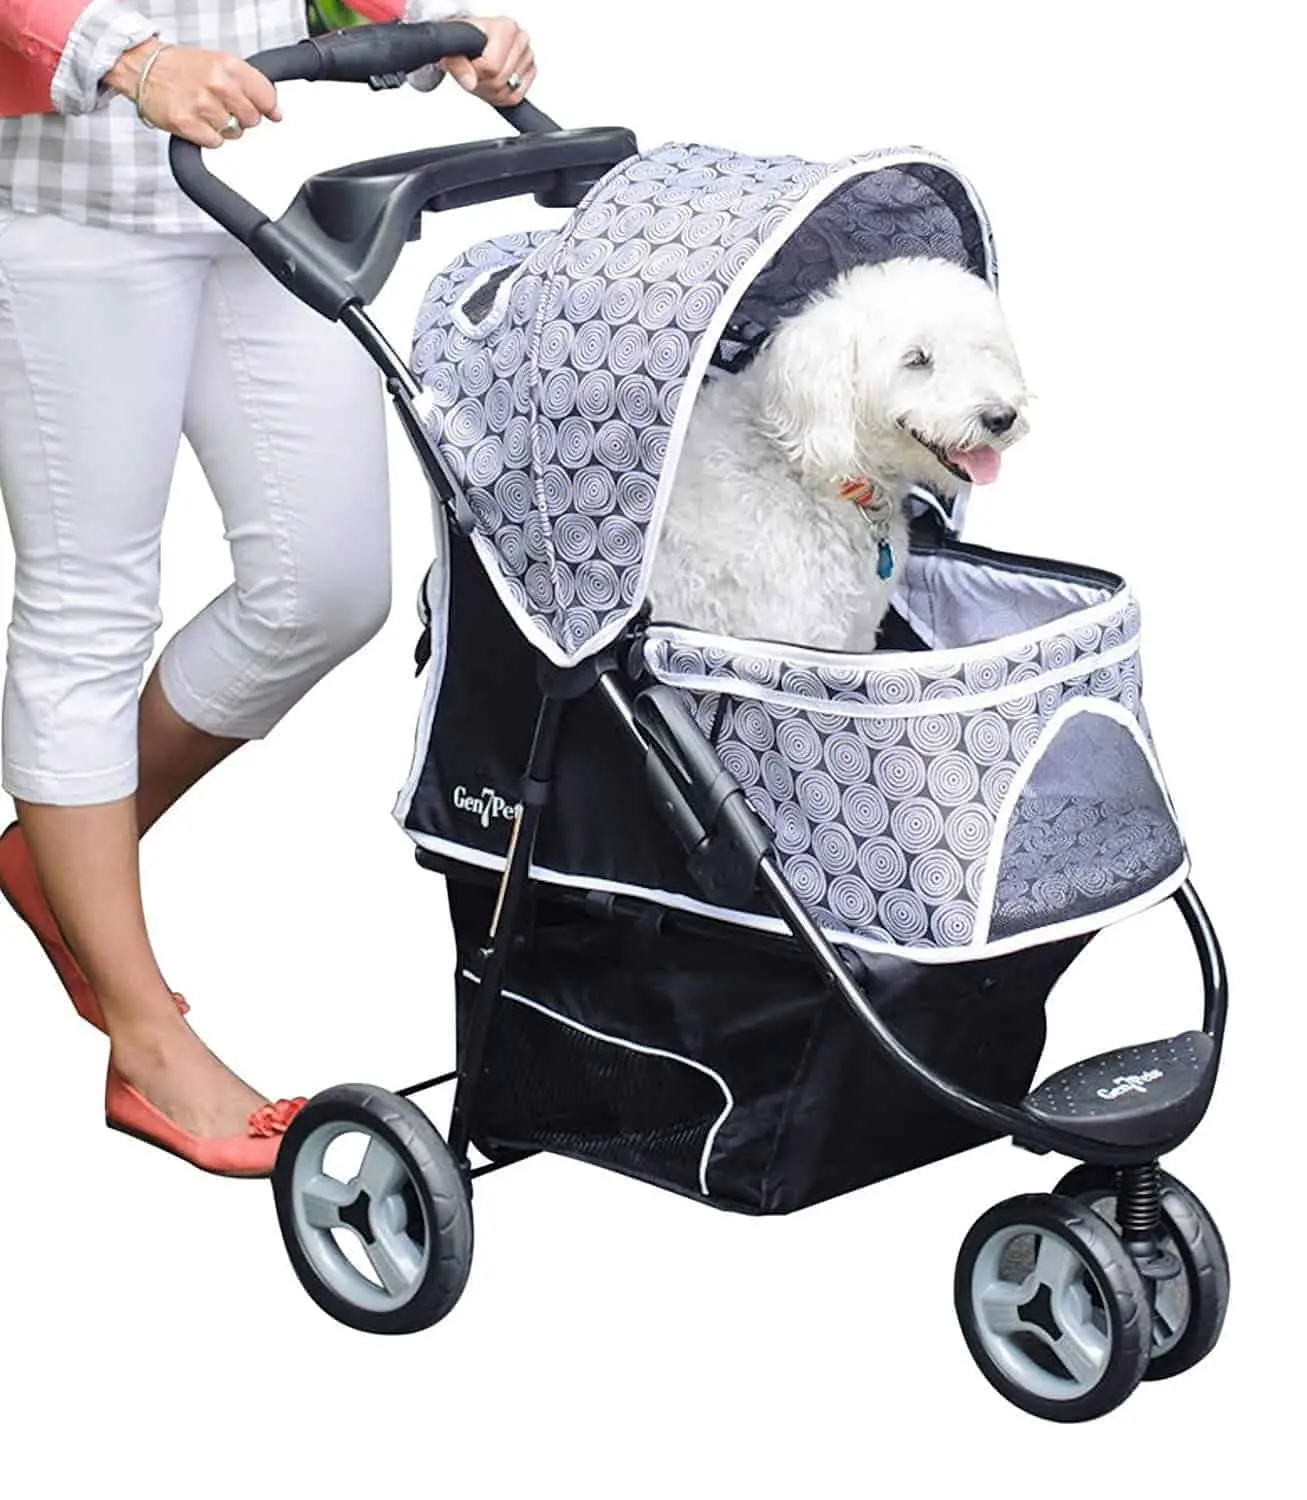 Gen7Pets Promenade Lightweight Compact Pet Stroller for Dogs and Cats up to 50lbs